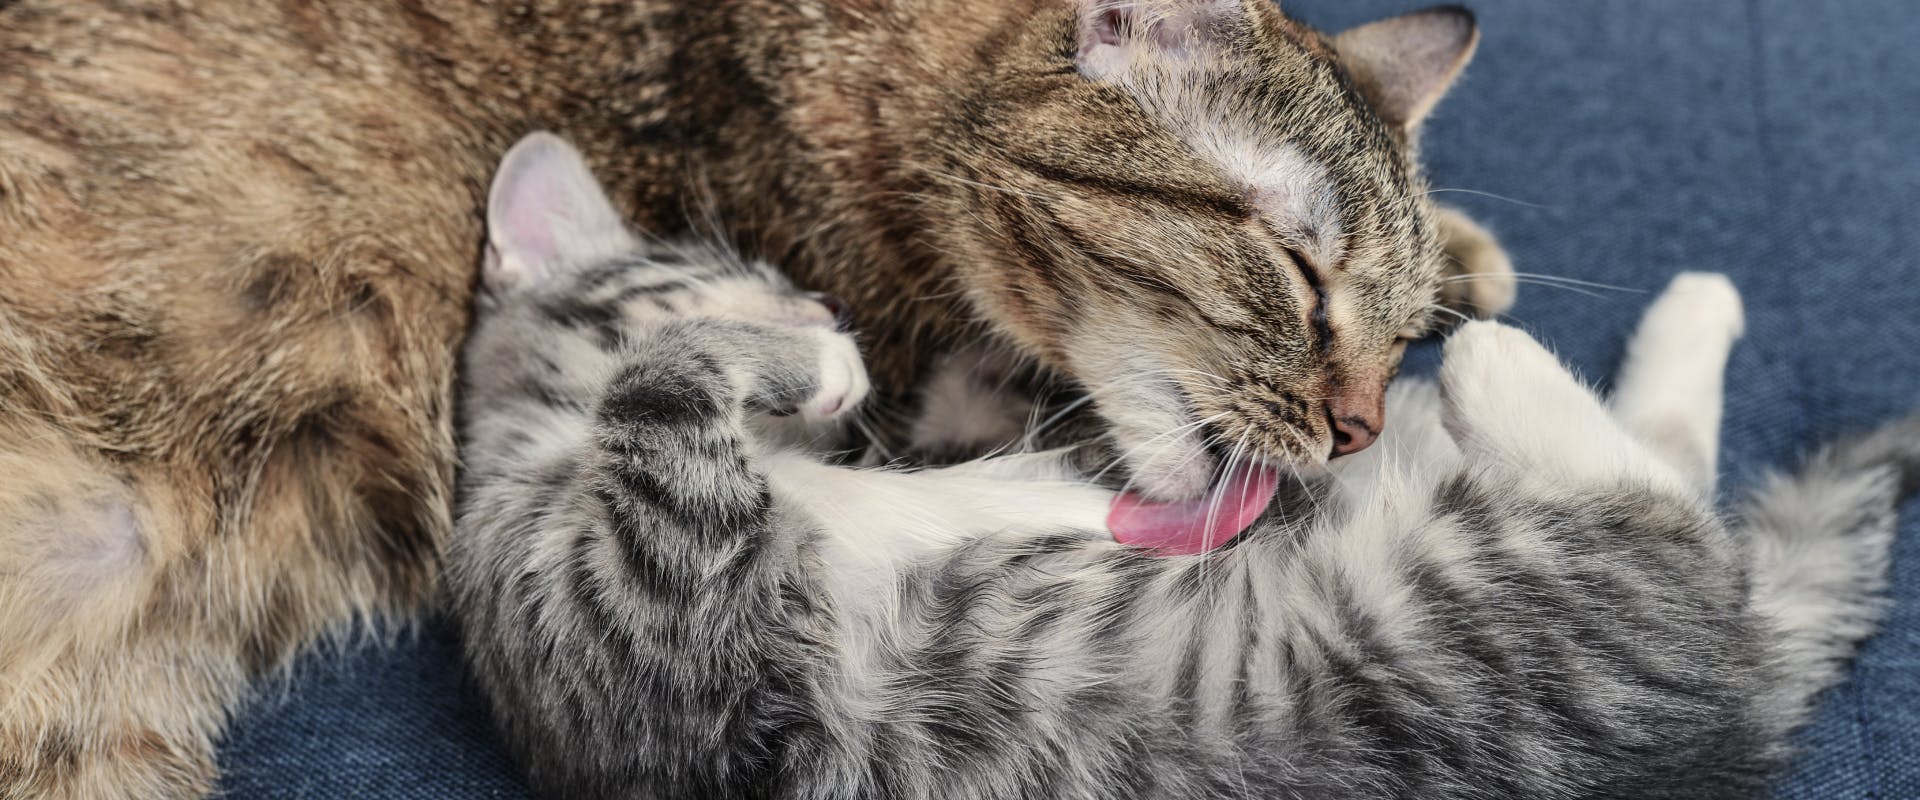 A cat licks its baby on the tummy.